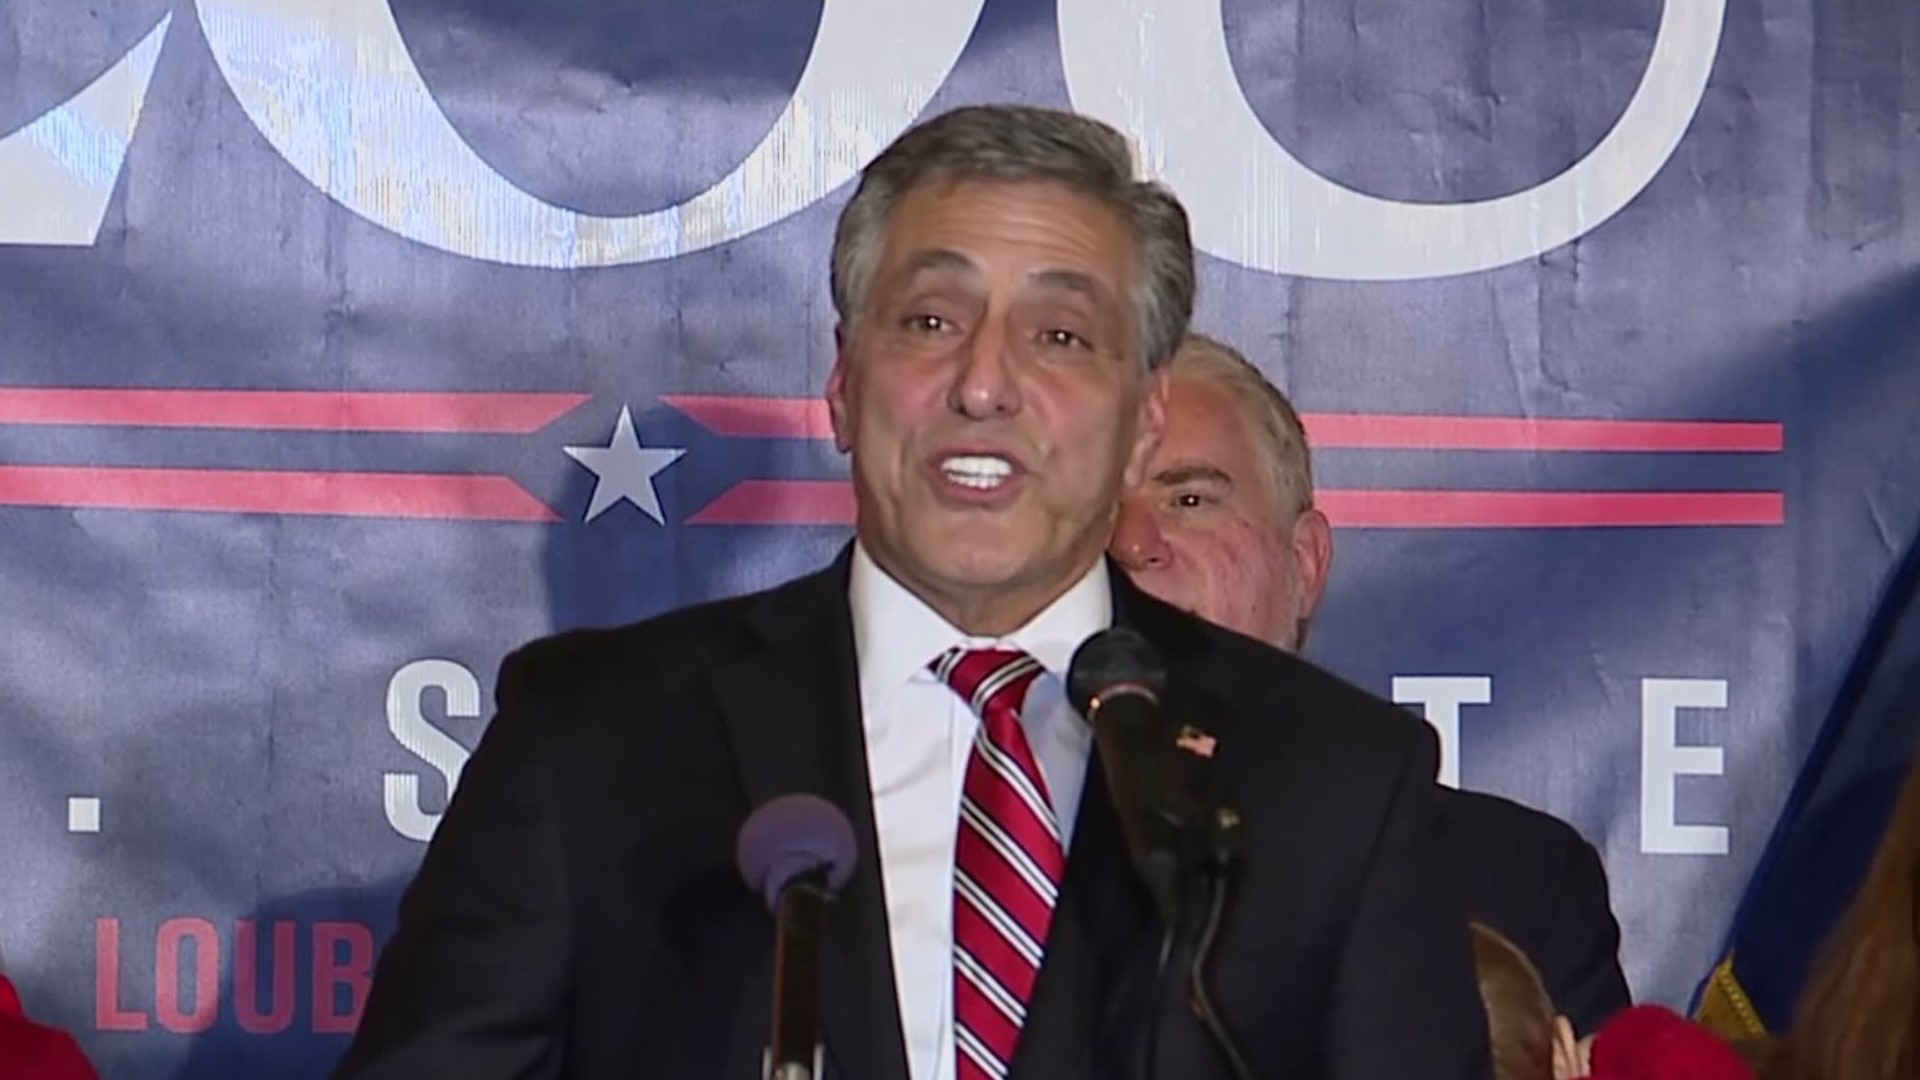 Lou Barletta announced Monday he is running for governor of Pennsylvania.